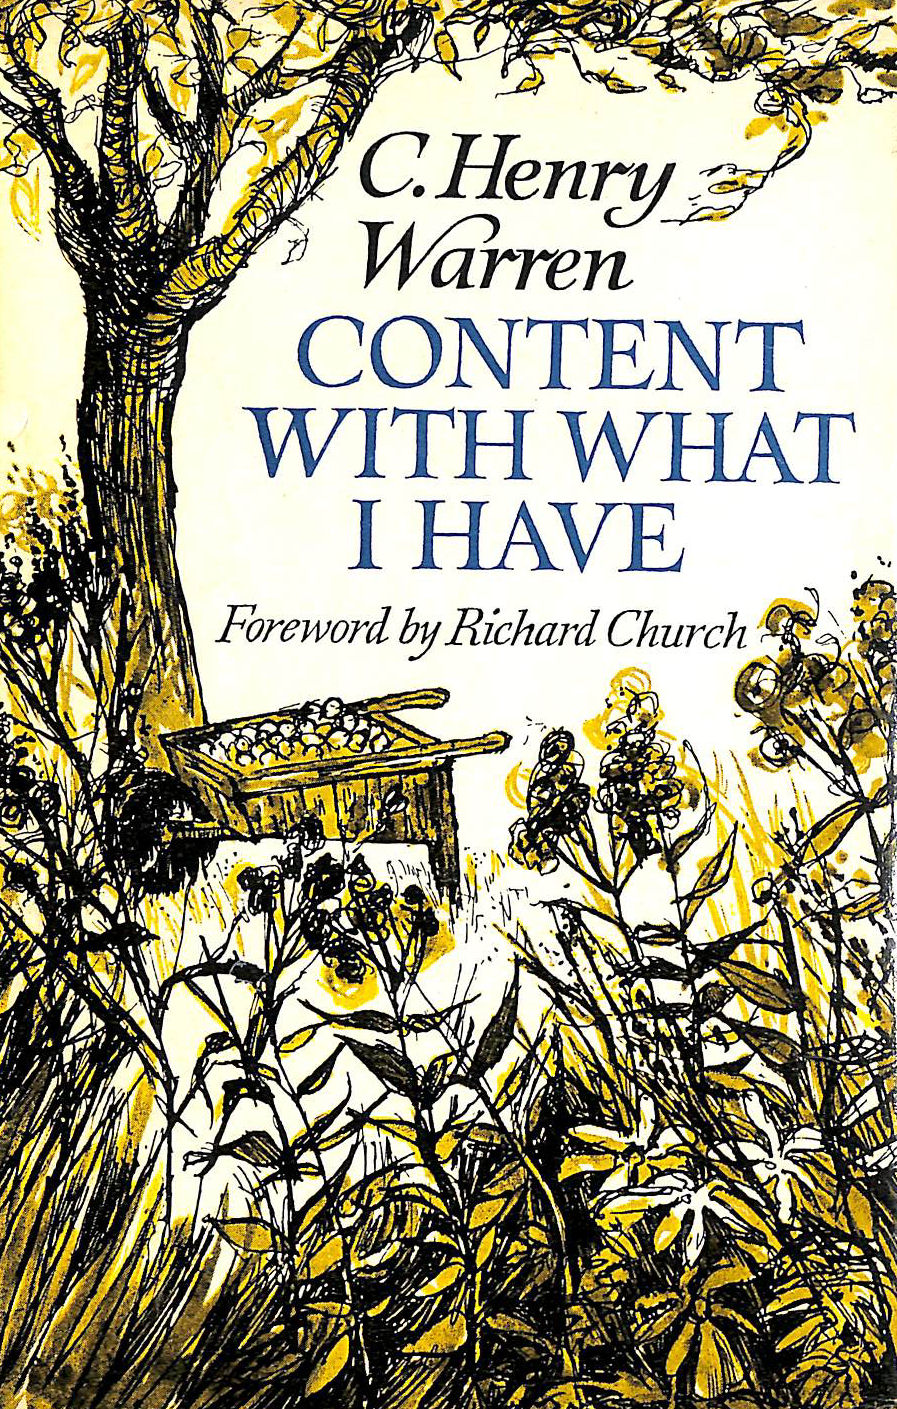 WARREN, C. HENRY - Content With What I Have